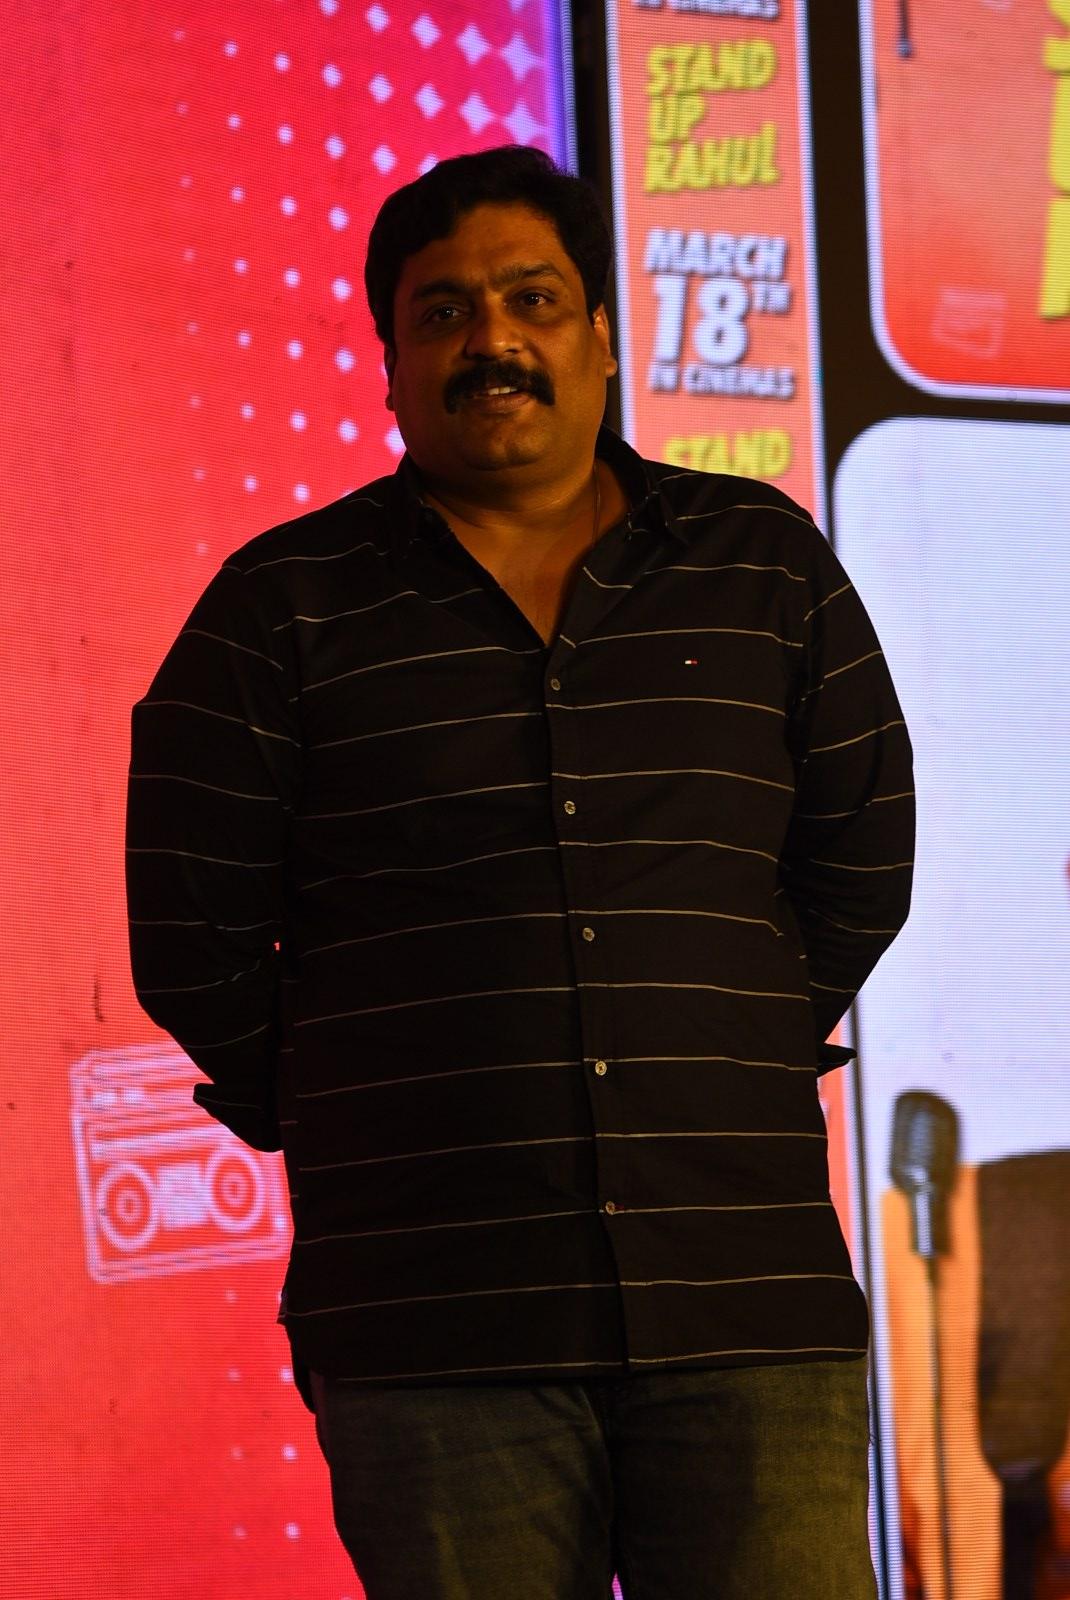 Stand Up Rahul Movie Pre Release Event 366